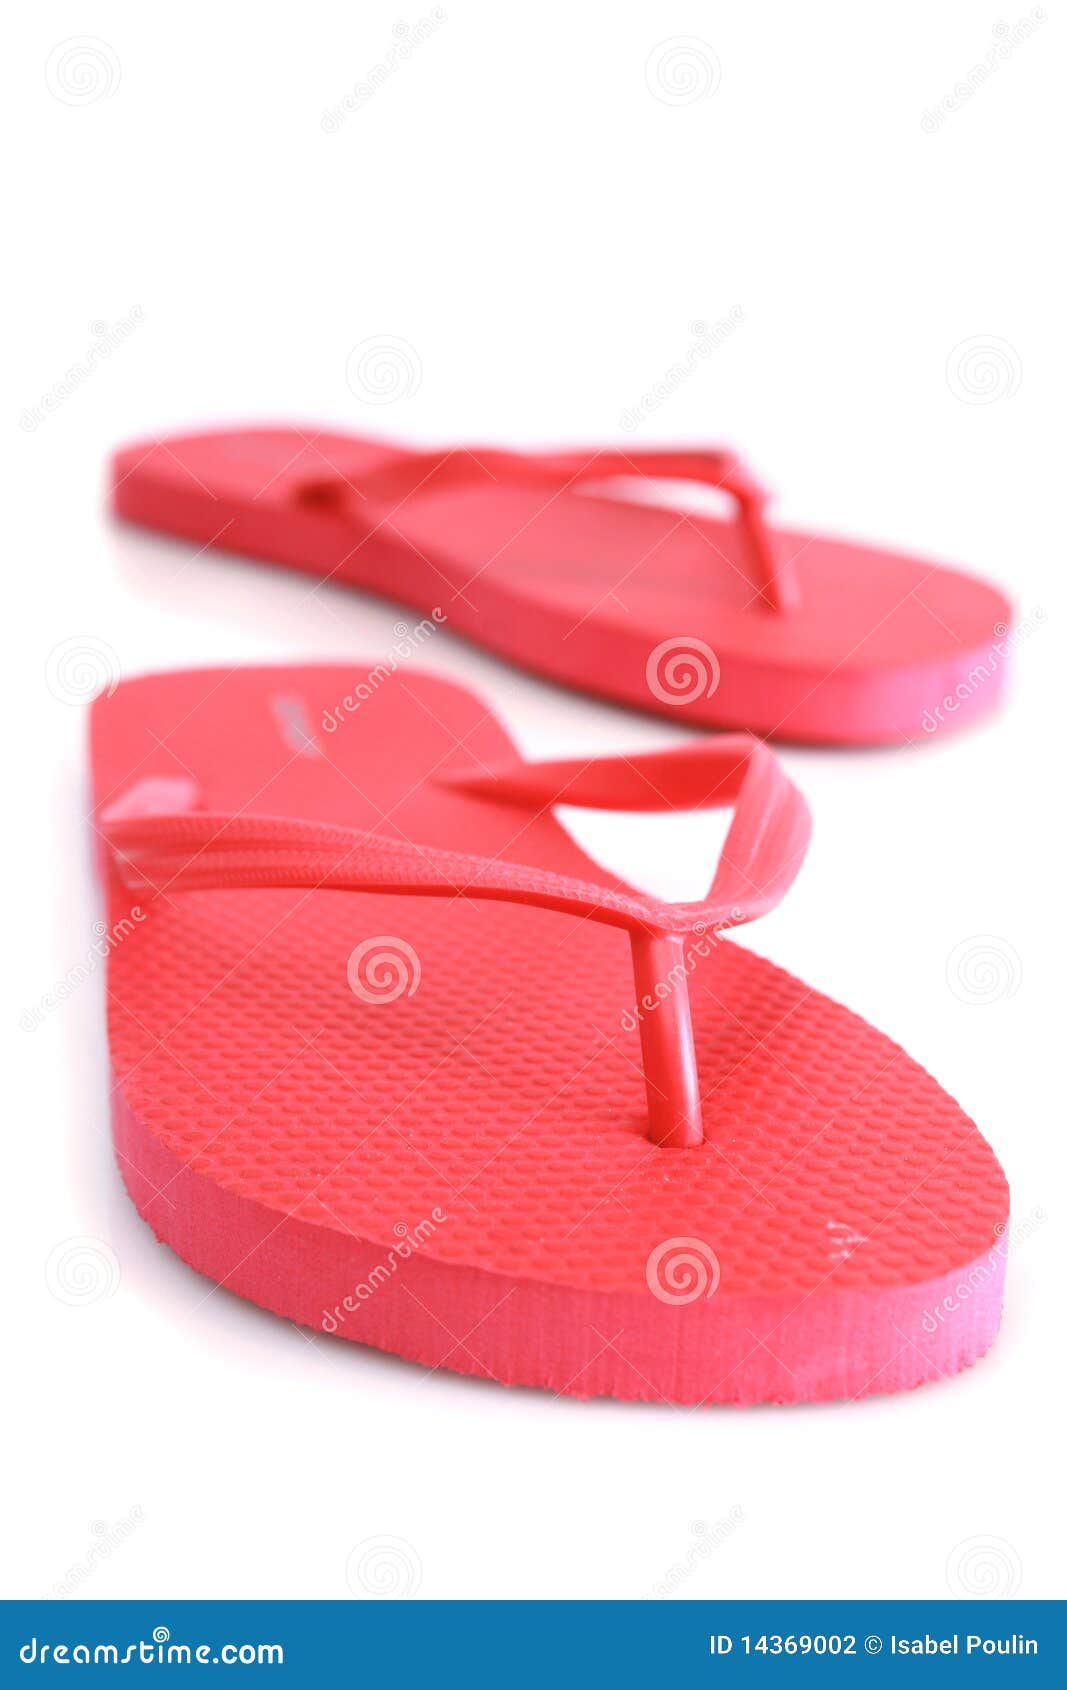 Red sandal beach stock photo. Image of leisure, cheerful - 14369002